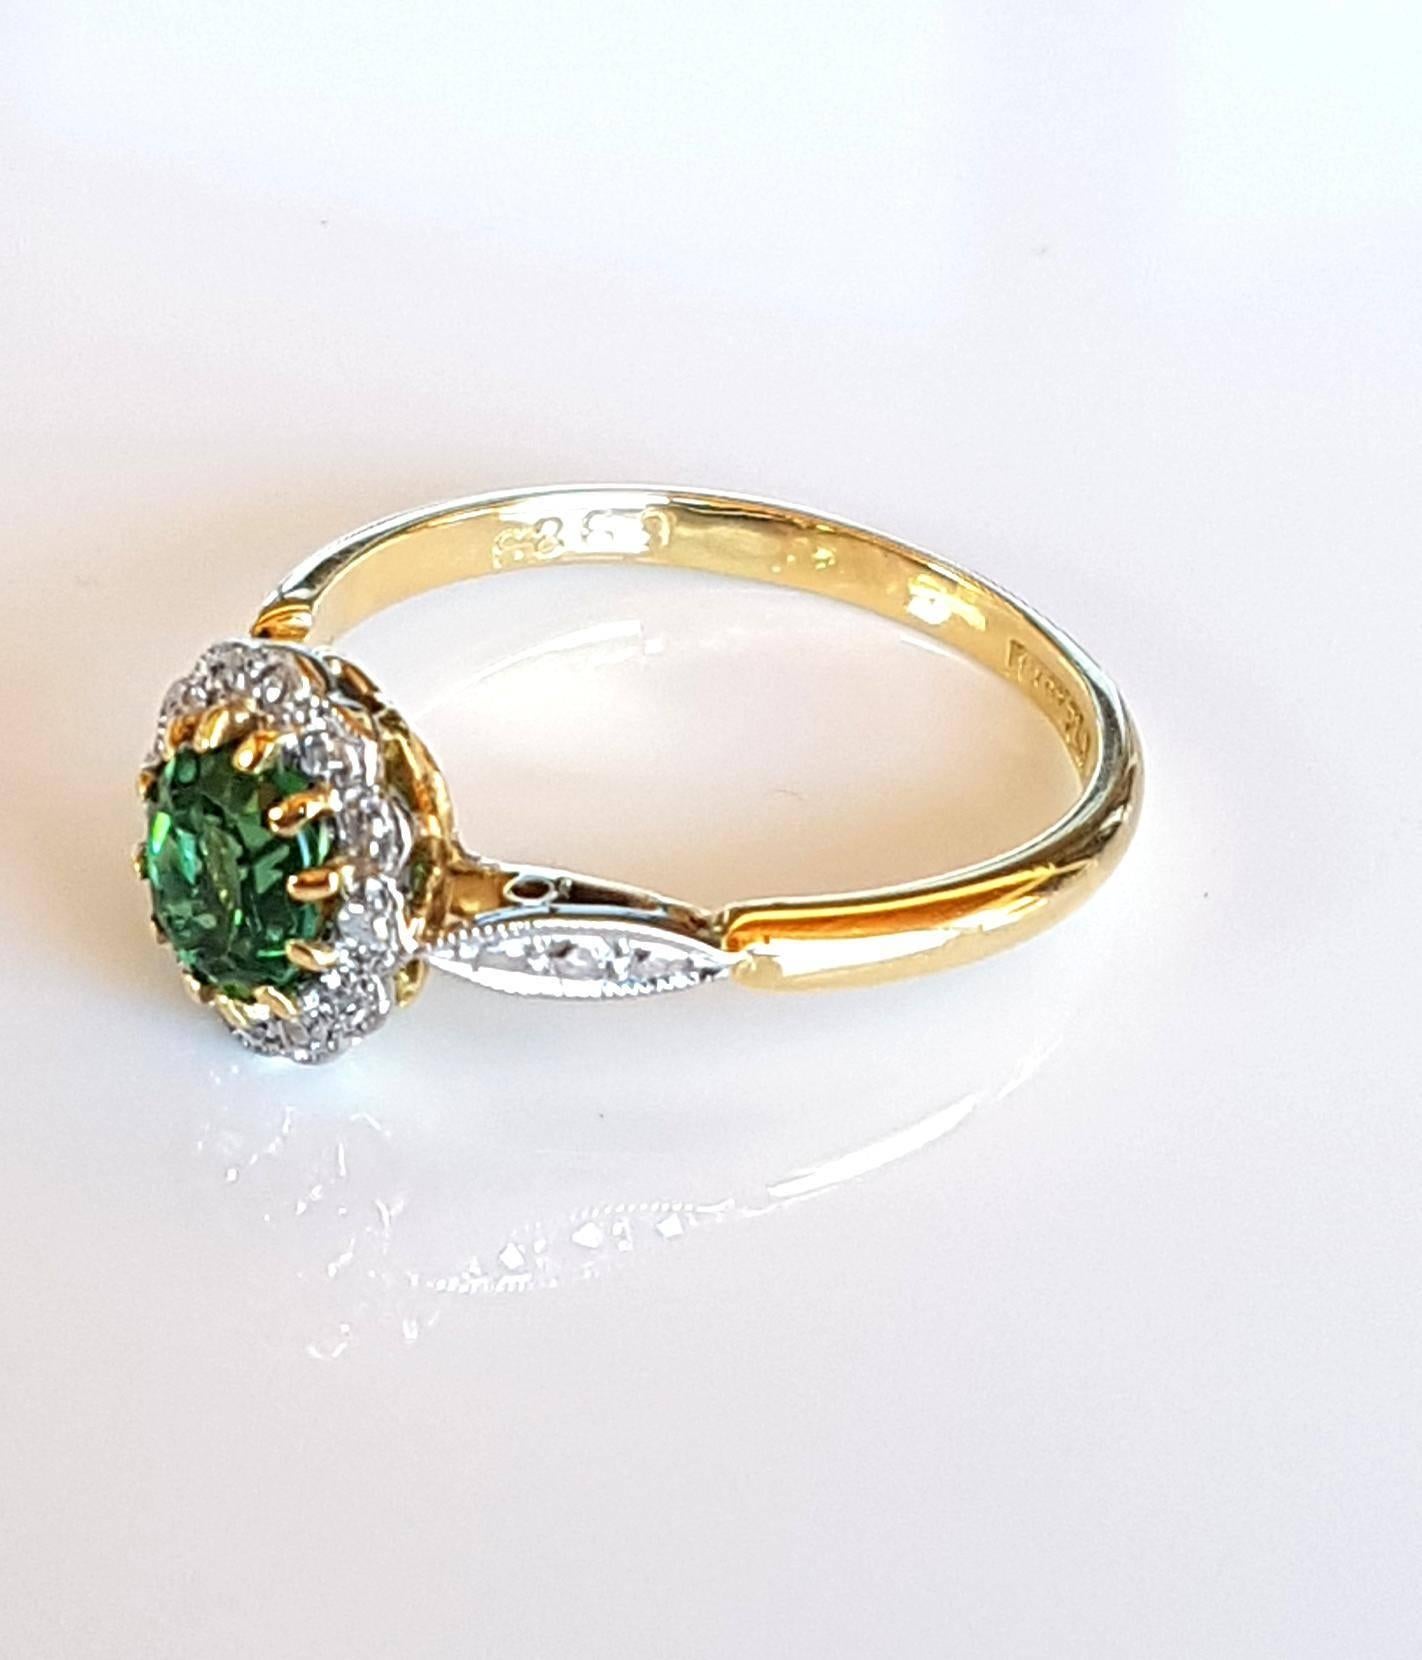 18ct Gold and platinum art deco green tourmaline and diamond ring platinum set with a centre oval facetted cut bluish green tourmaline surrounded by 12 single cut diamonds of total weight 0.06ct colour H, clarity VS and illusion shoulders. Currently